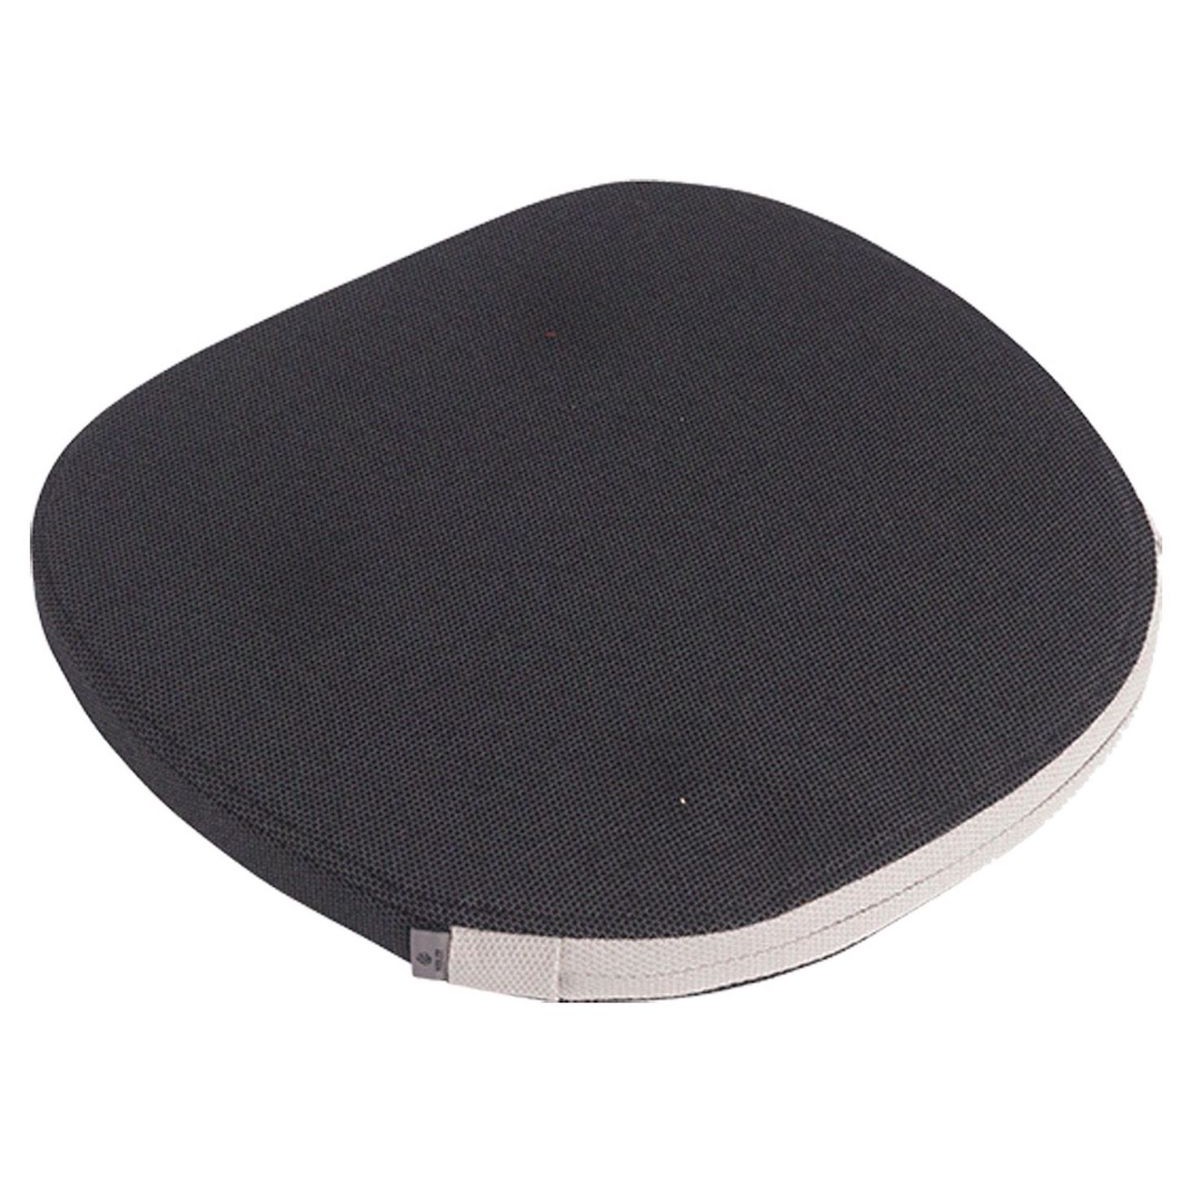 SOLD OUT - black/white - seat cushion J46